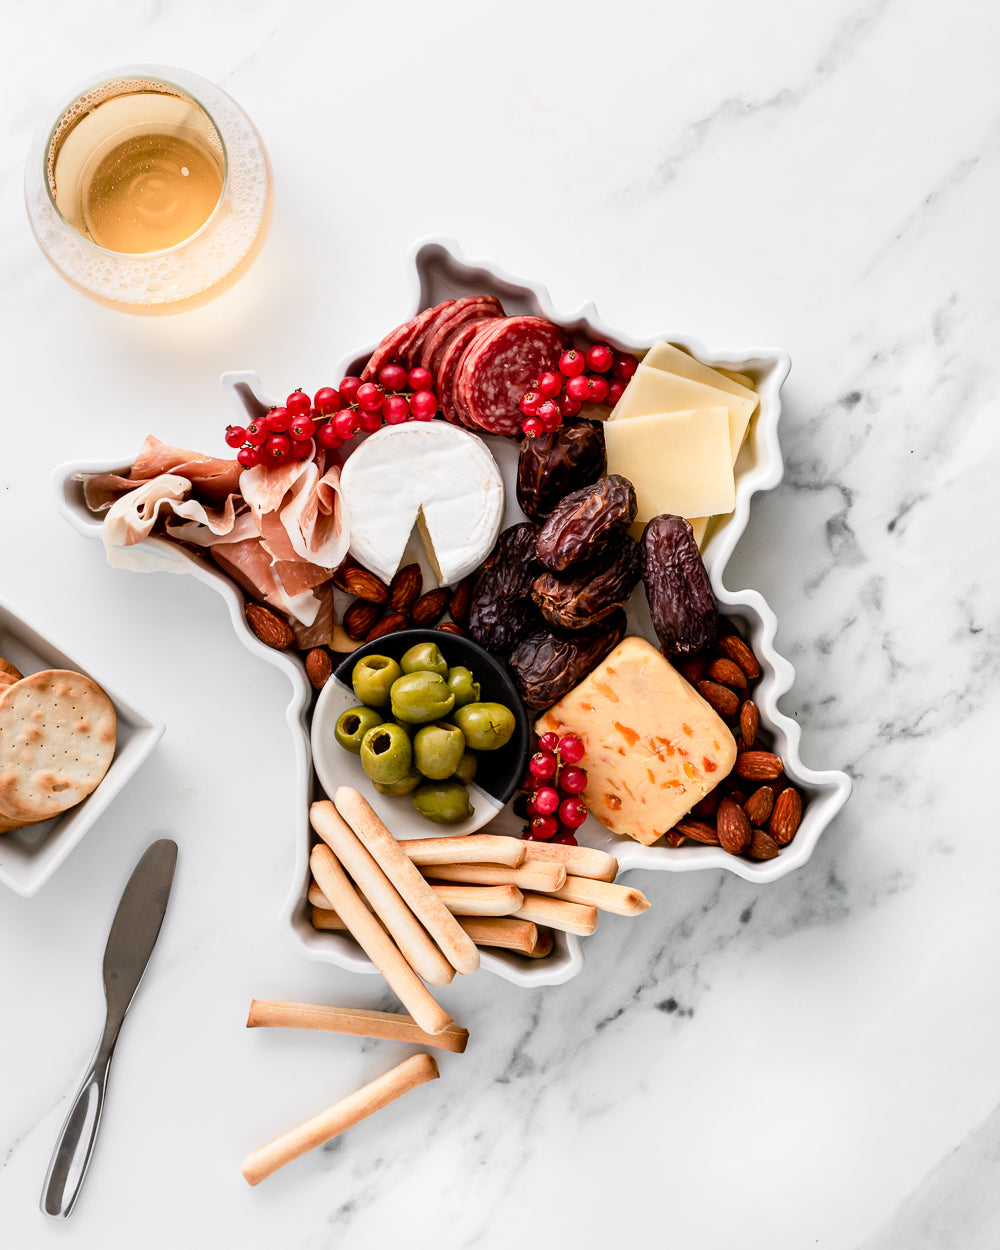 charcuterie board with cheese and cured meats in a france shaped serving tray platter dish